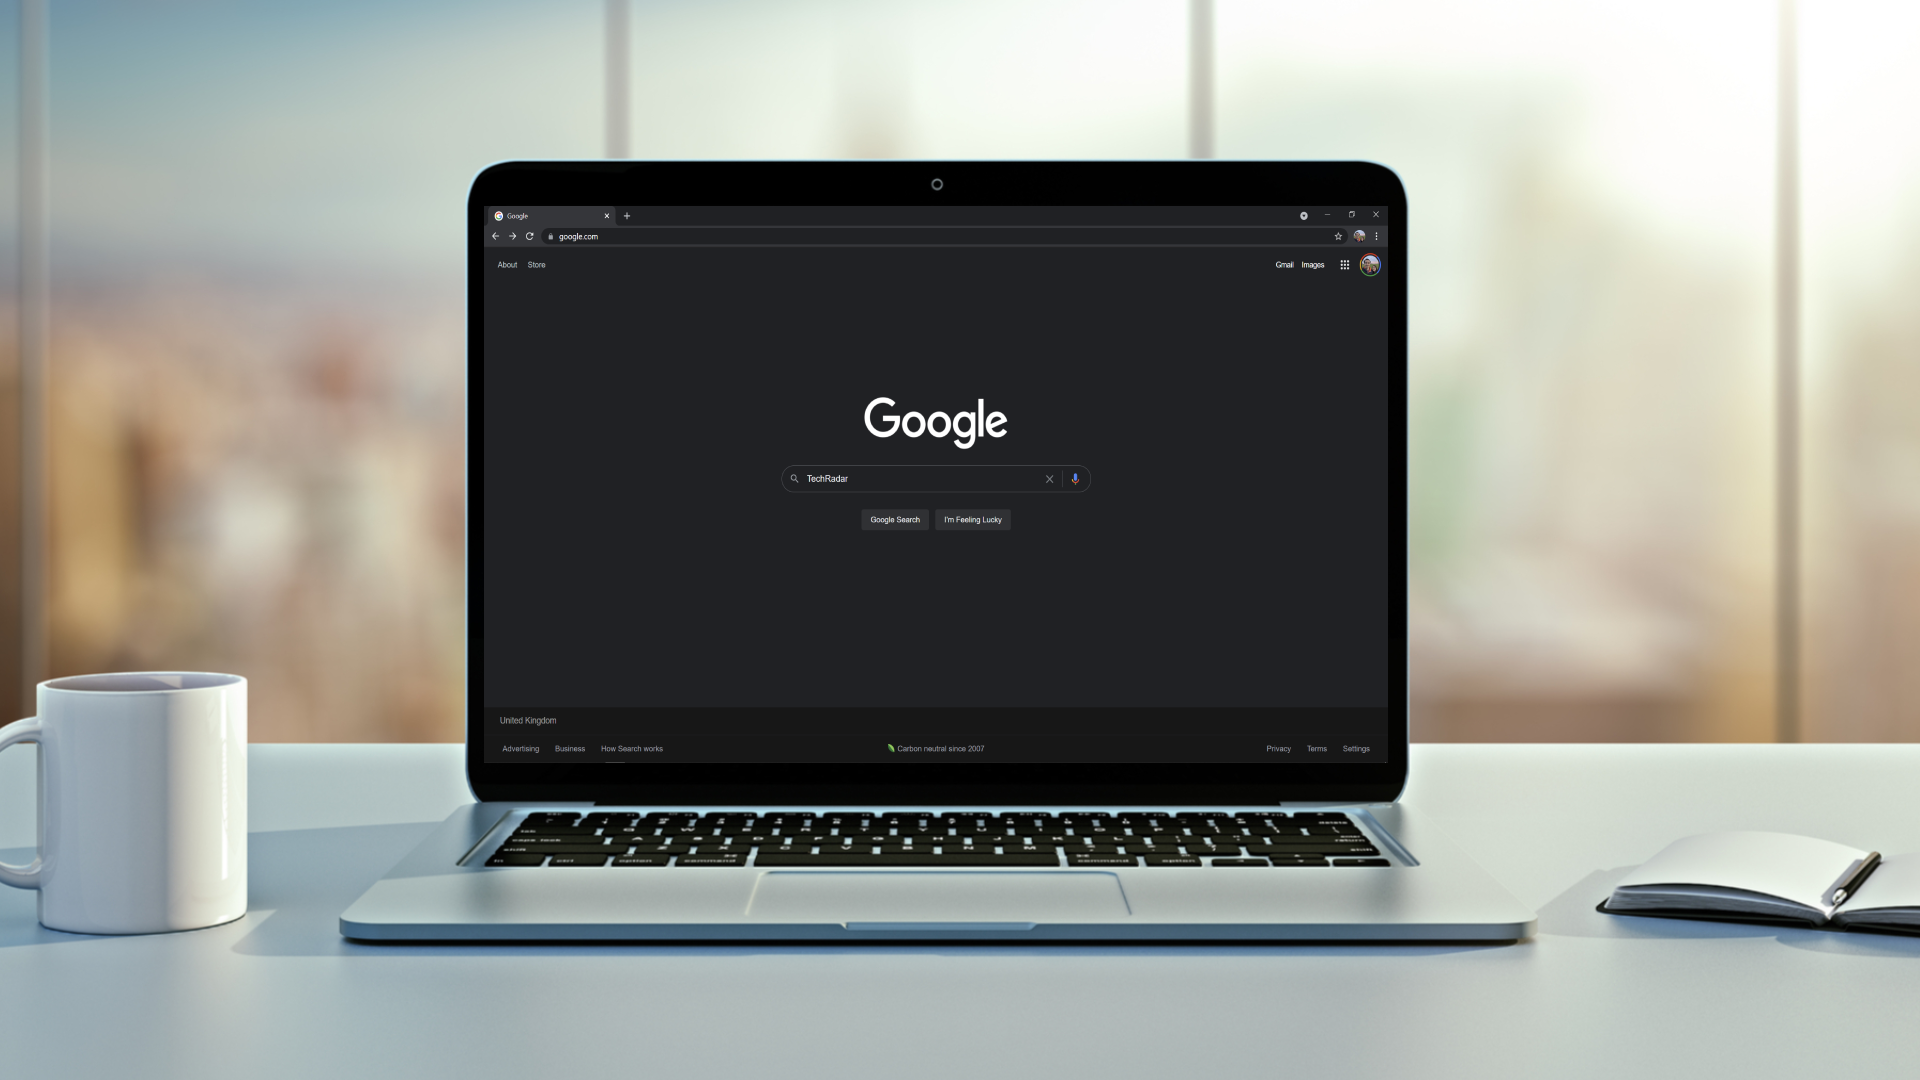 Google Search full dark mode is starting to roll out for some users